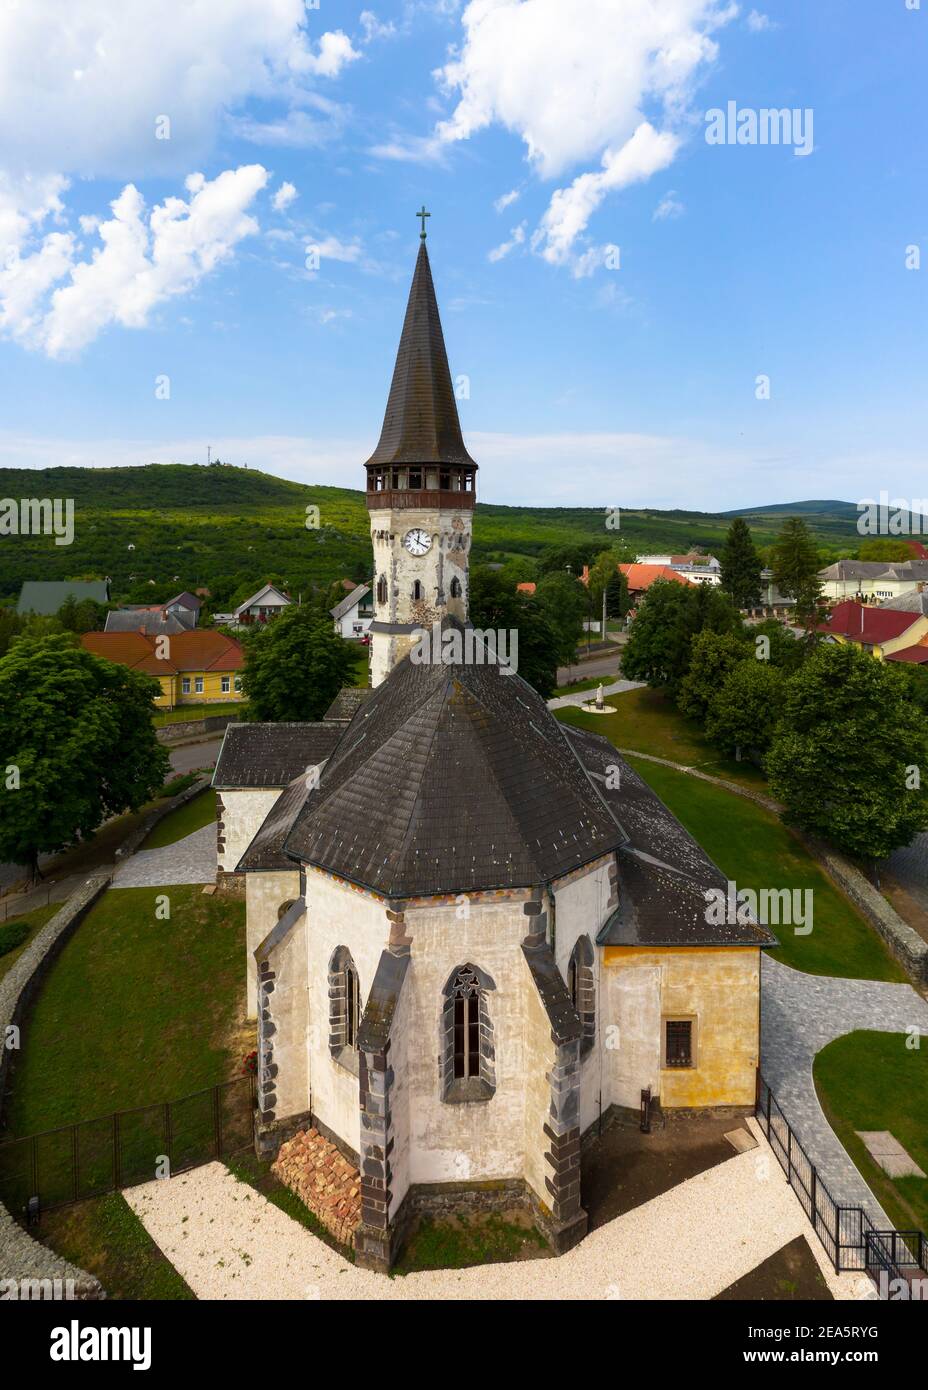 Aerial photo about the Church of the Assumption in Gyongyospata Hungary. Historical religious monument. Built in 12th century romanian baroque and got Stock Photo